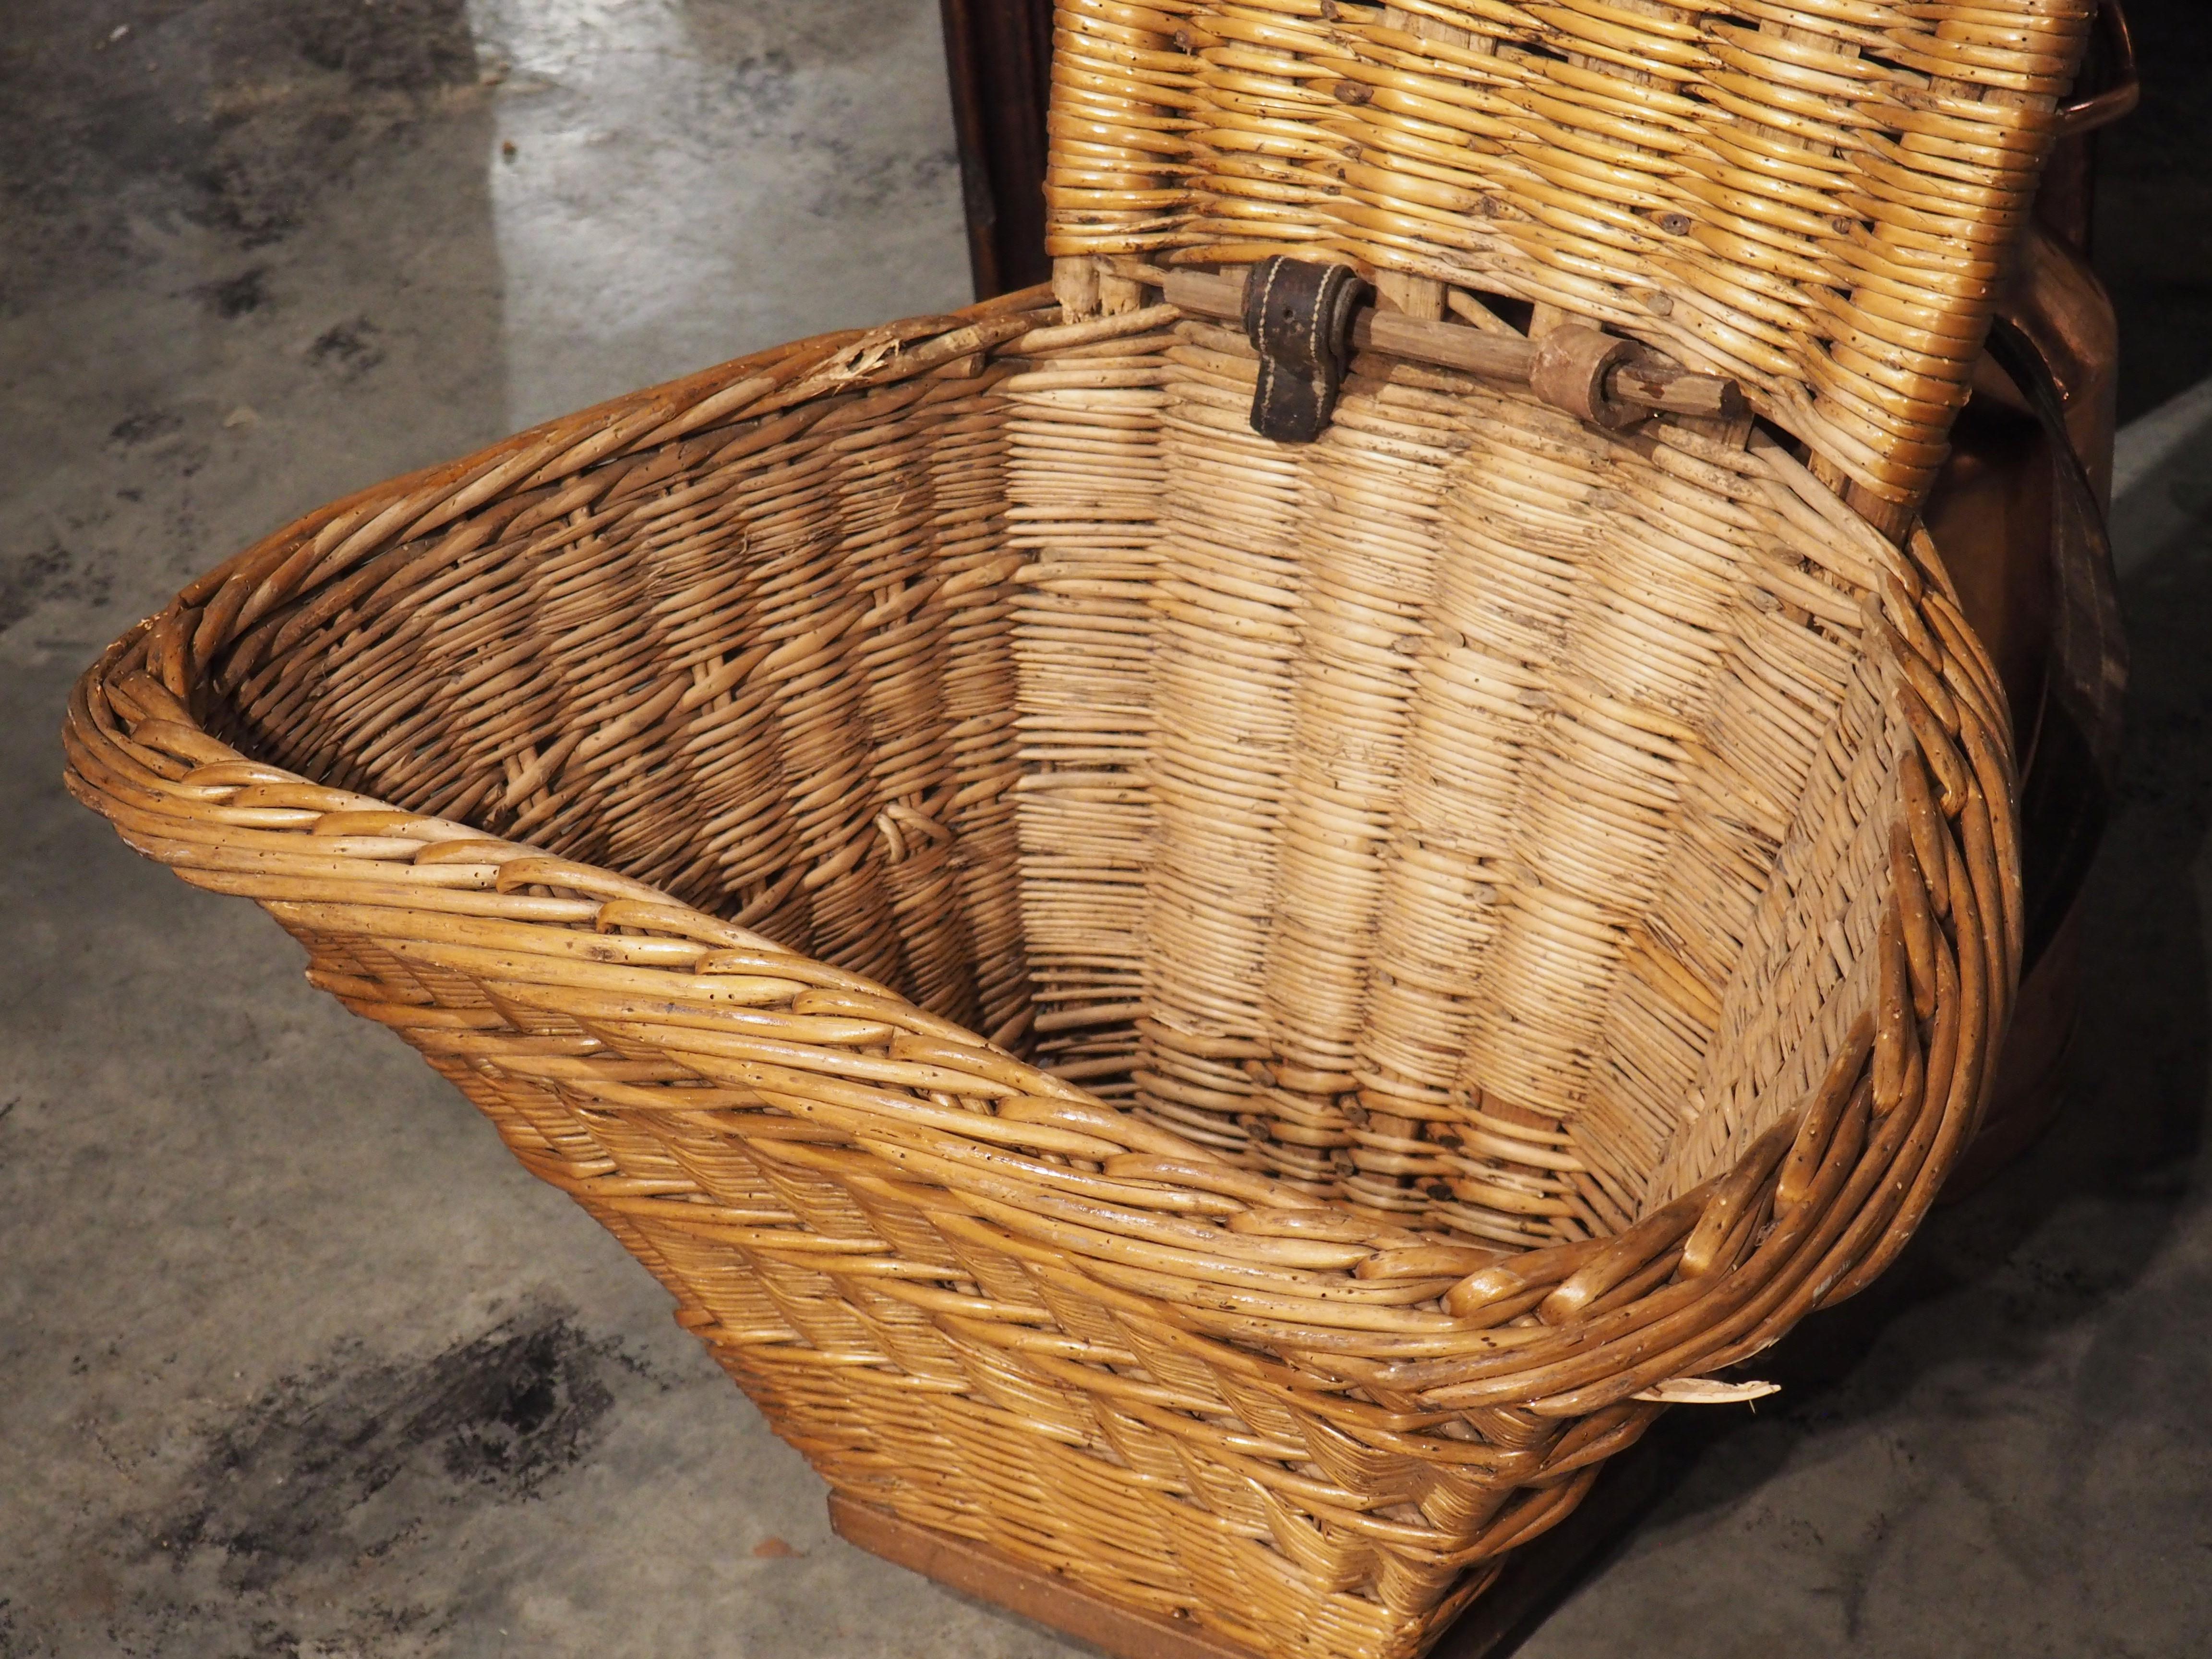 Leather Handwoven Wine Grape Harvesting Basket from Beaune France, circa 1890